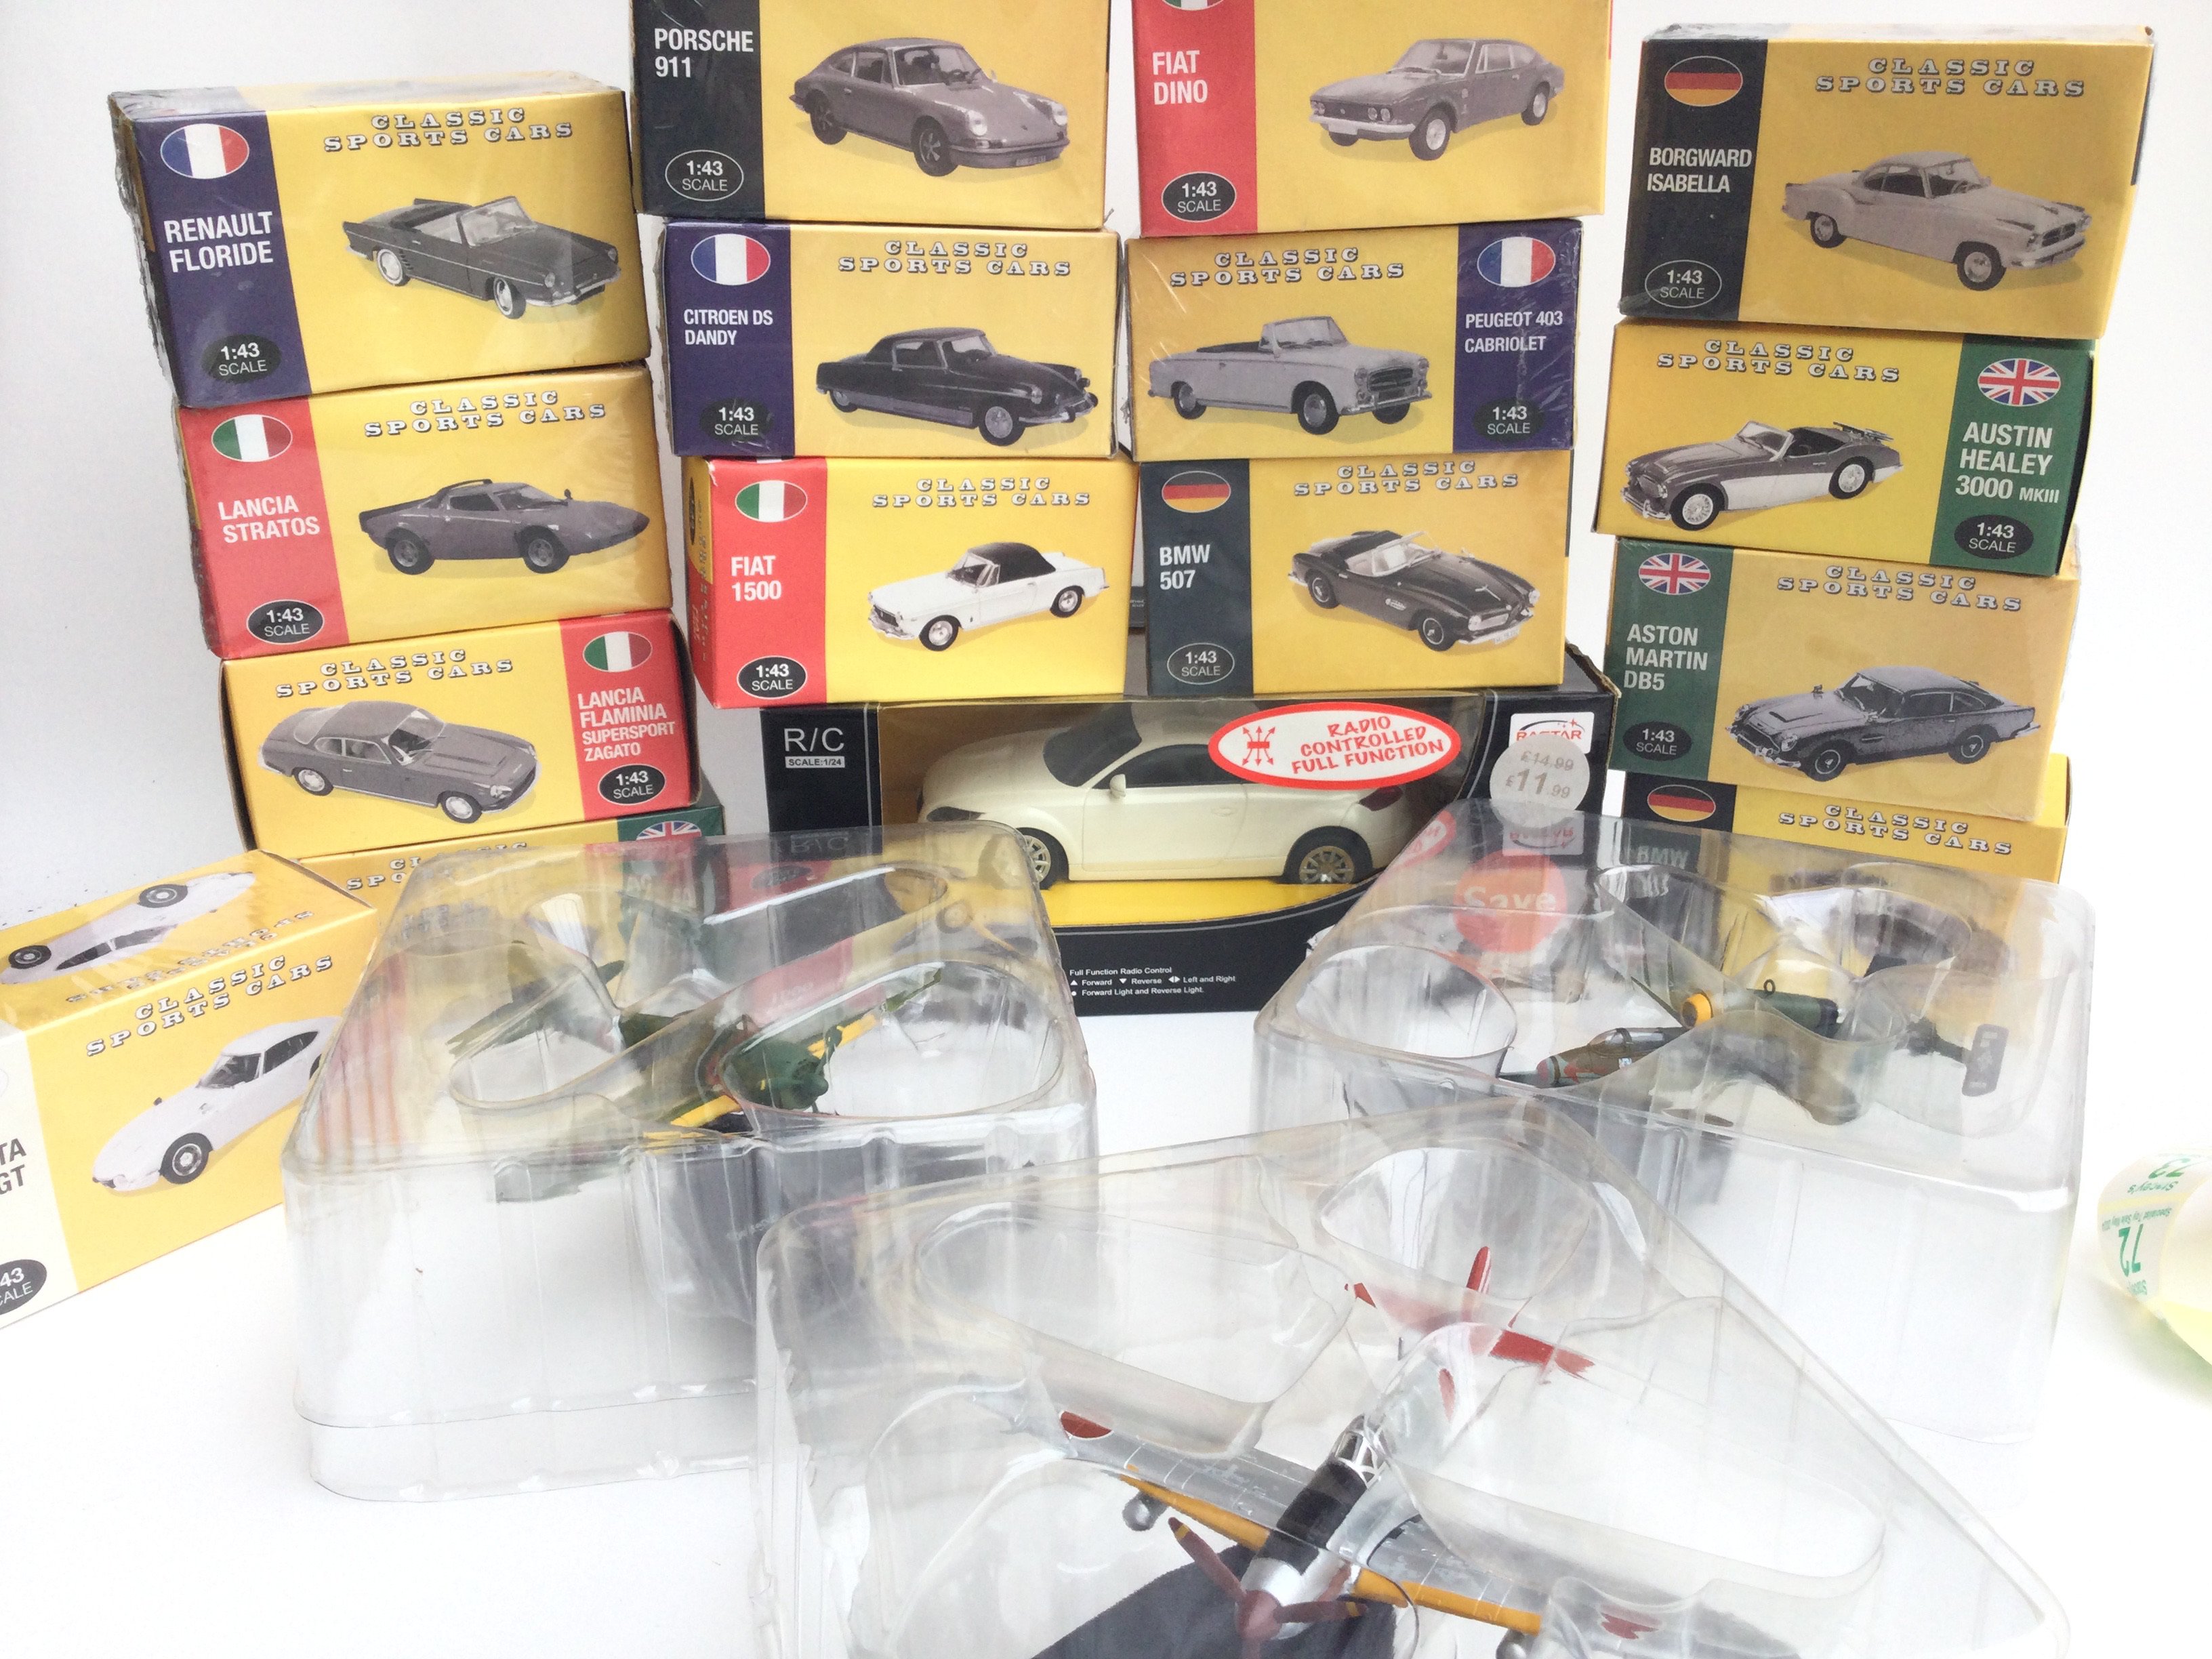 A Collection of Boxed Atlas Classic Sports Cars. A